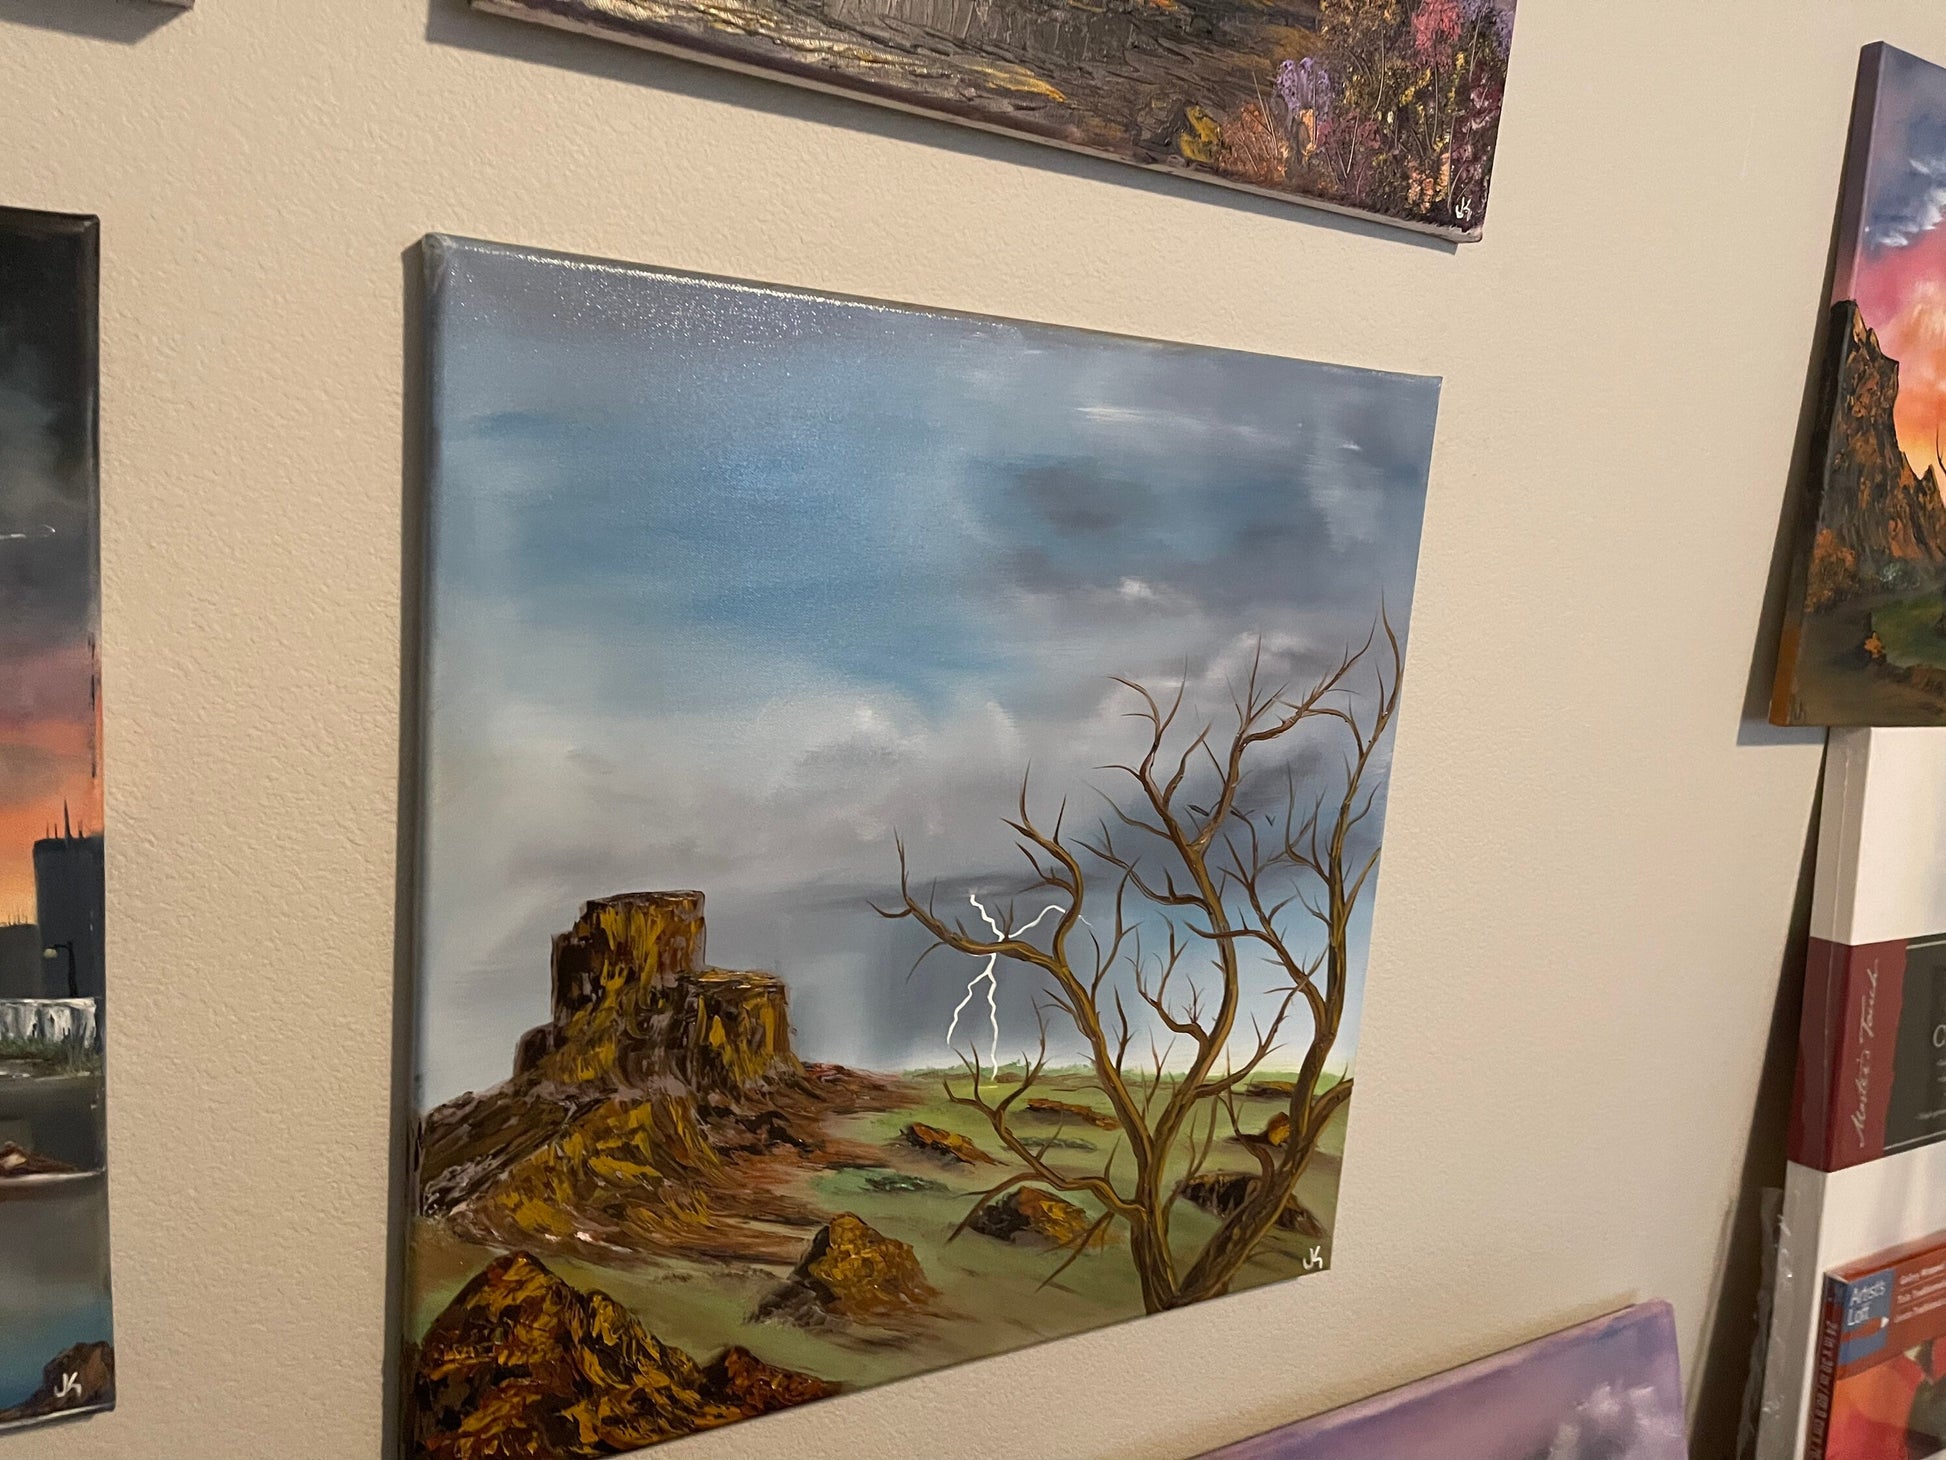 PWJ Classic - 24x24" Sedona Arizona Desert Landscape Oil Painting + Video featuring Monument Style Bluffs and Thunderstorm by PaintWithJosh